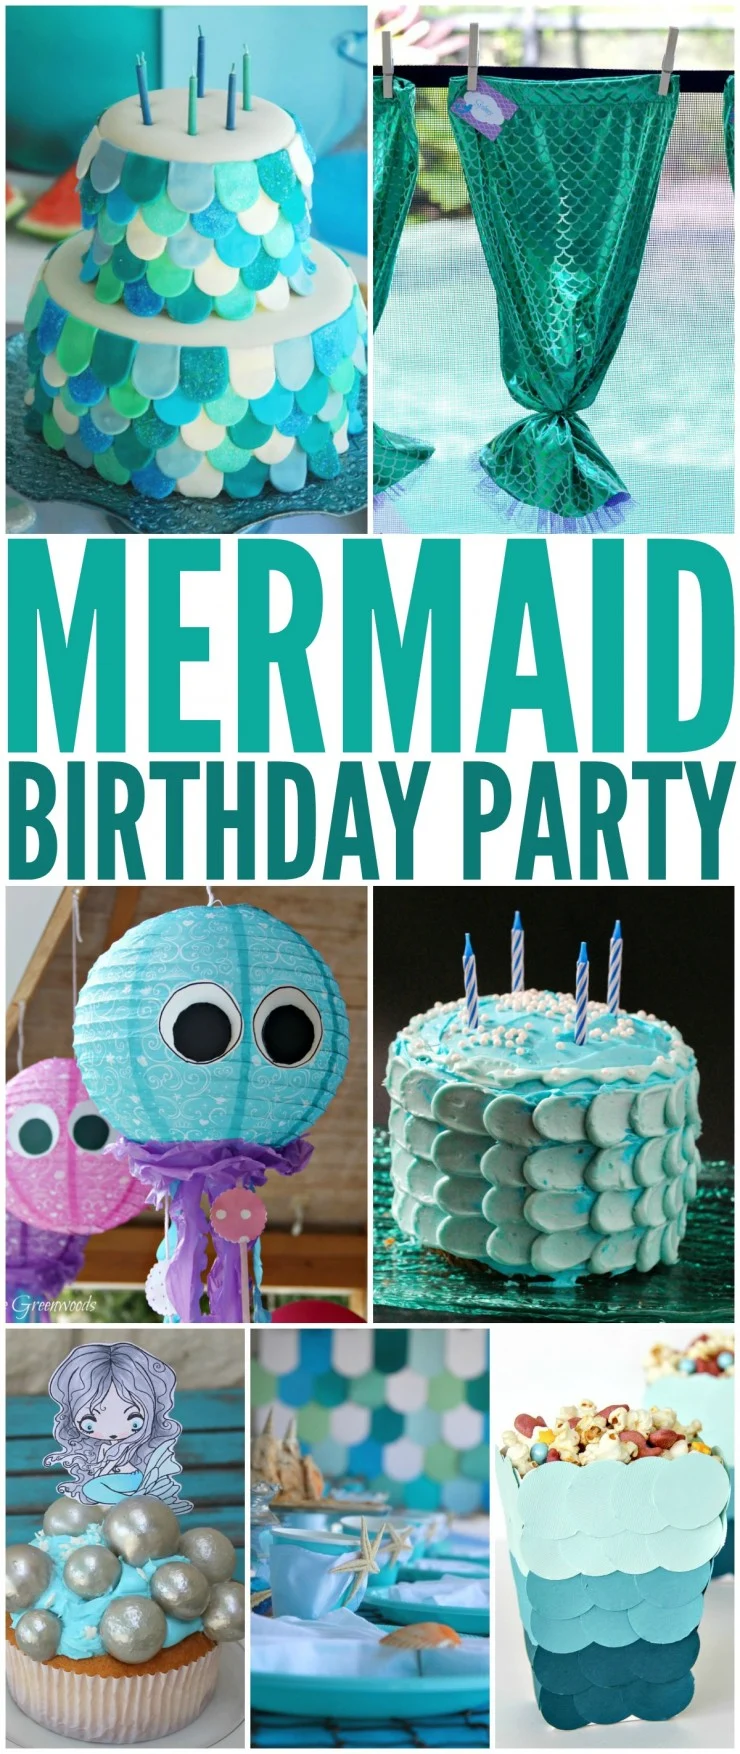  How to Throw the Ultimate Mermaid Birthday Party to please any birthday girl. Little girls love mermaids, and so a Mermaid themed birthday party is a natural choice. Check out these 25 ideas that will help you throw an amazing Mermaid themed party for girls!